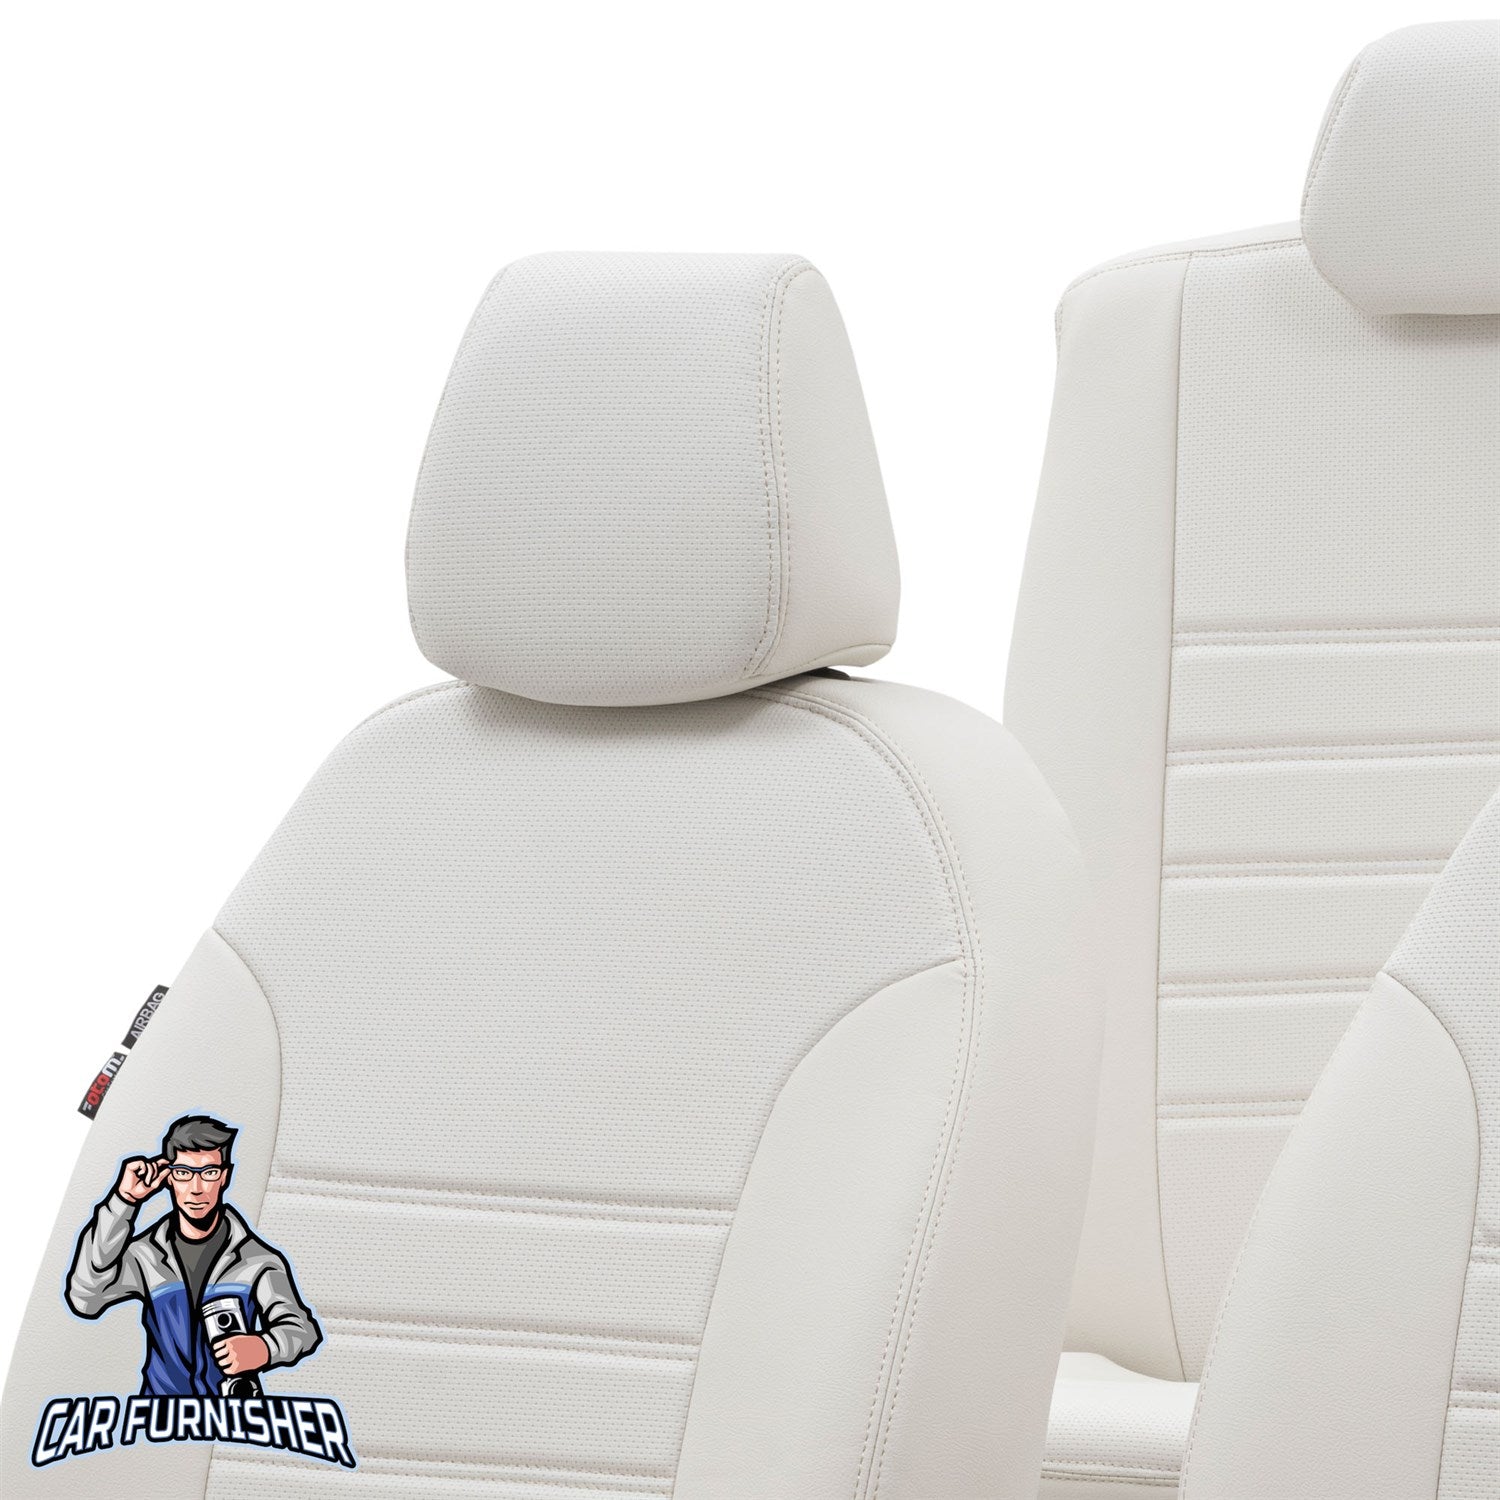 Mazda 626 Seat Cover New York Leather Design Ivory Leather